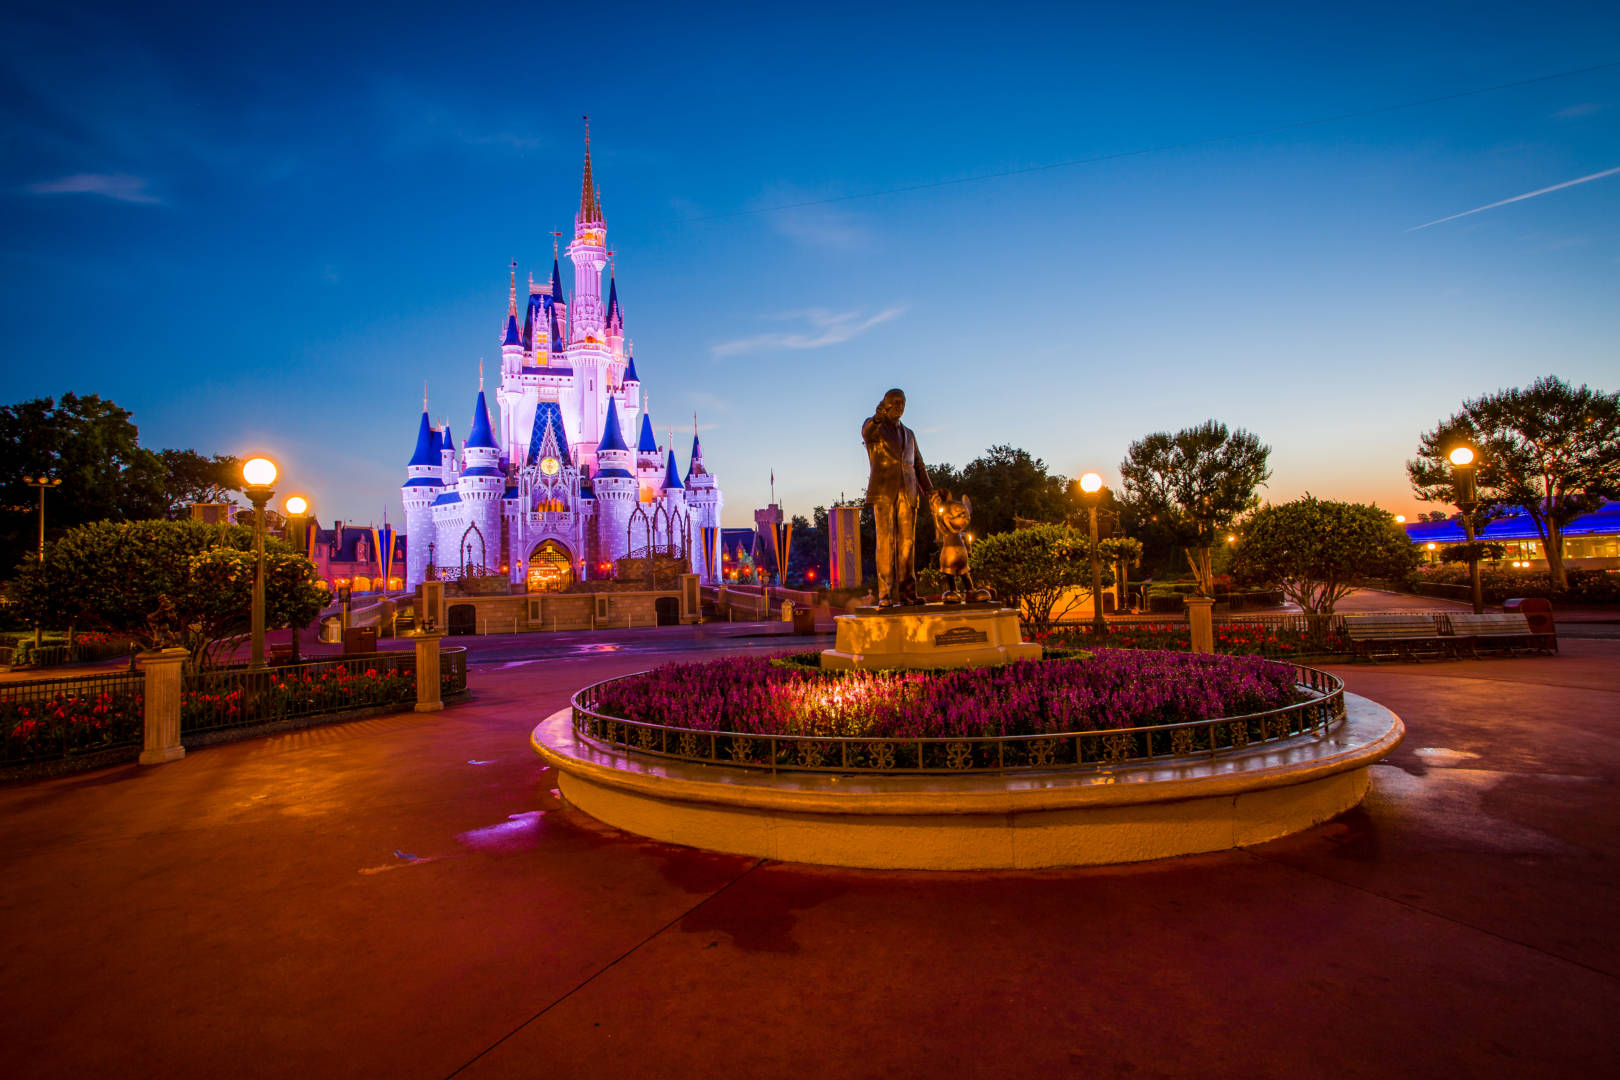 DISNEY WORLD IS OPEN! The Year 2020 Tridence Blog Jacksonville FL & Chicago IL